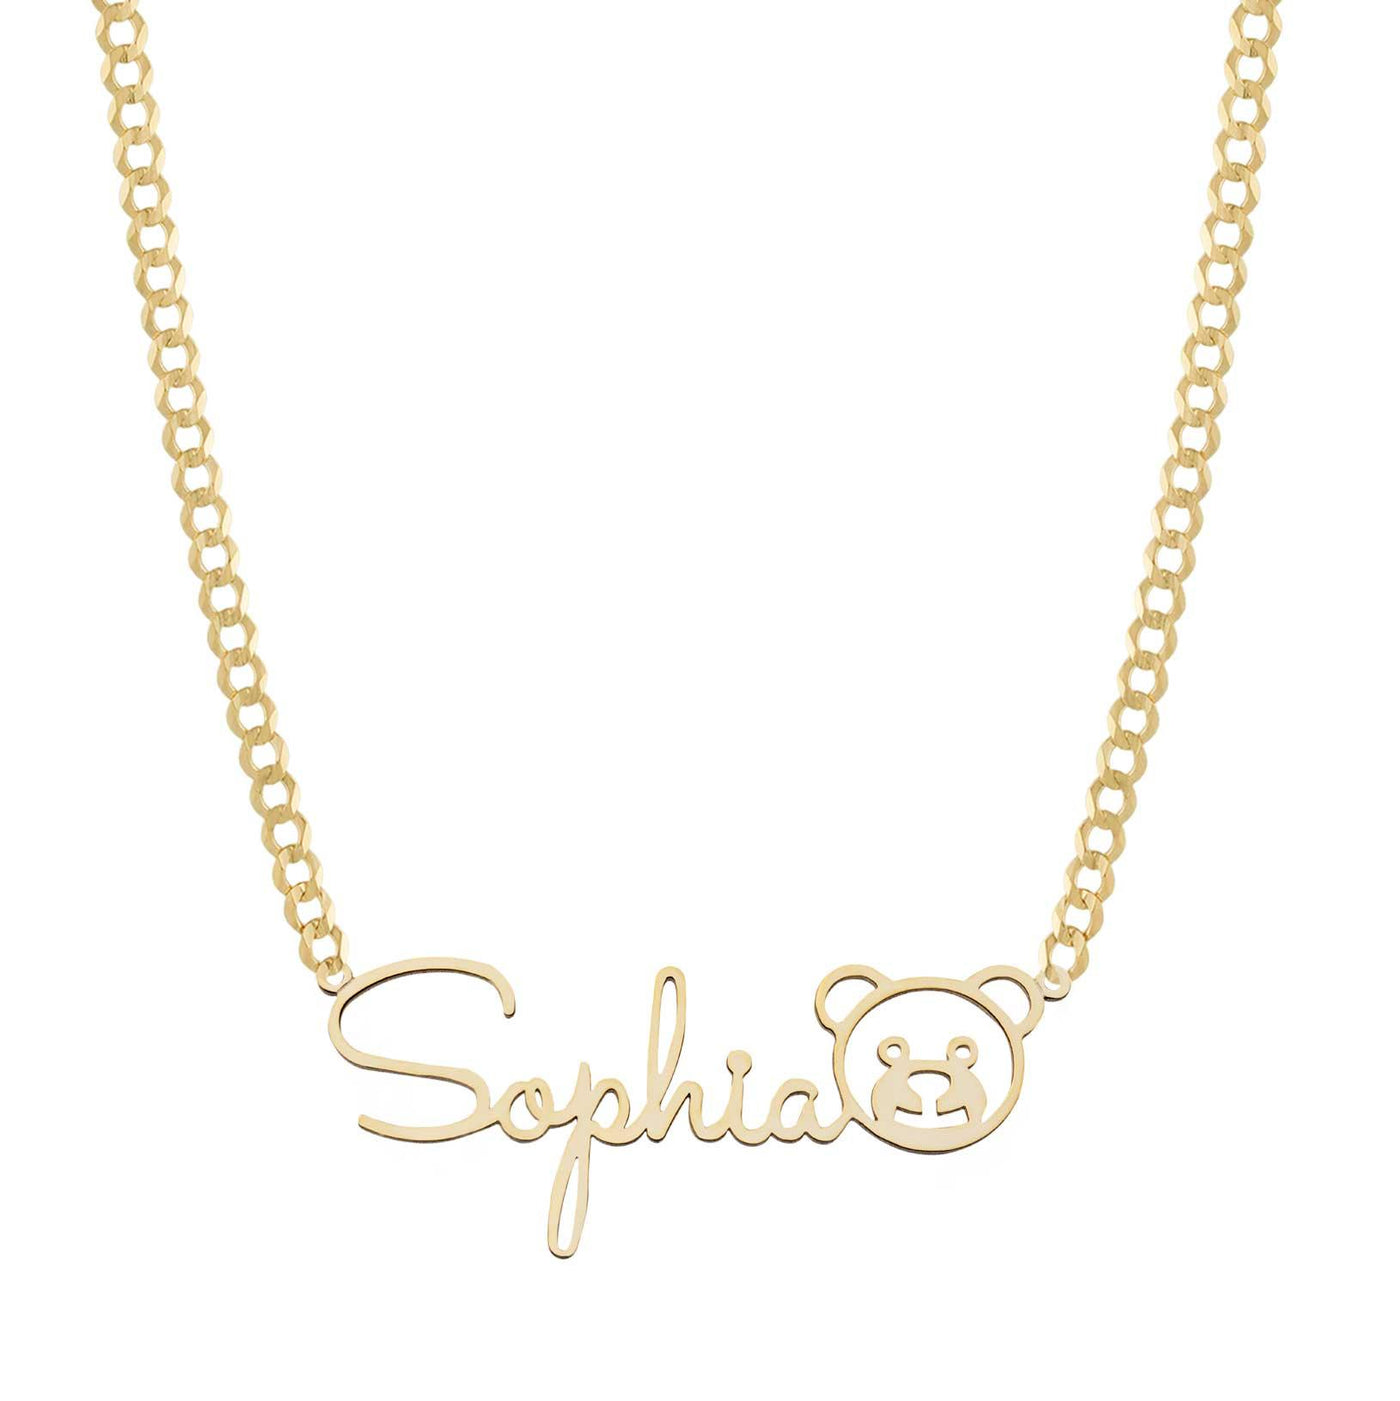 Ladies Teddy Bear Name Plate Necklace 14K Gold - Style 140 - bayamjewelry